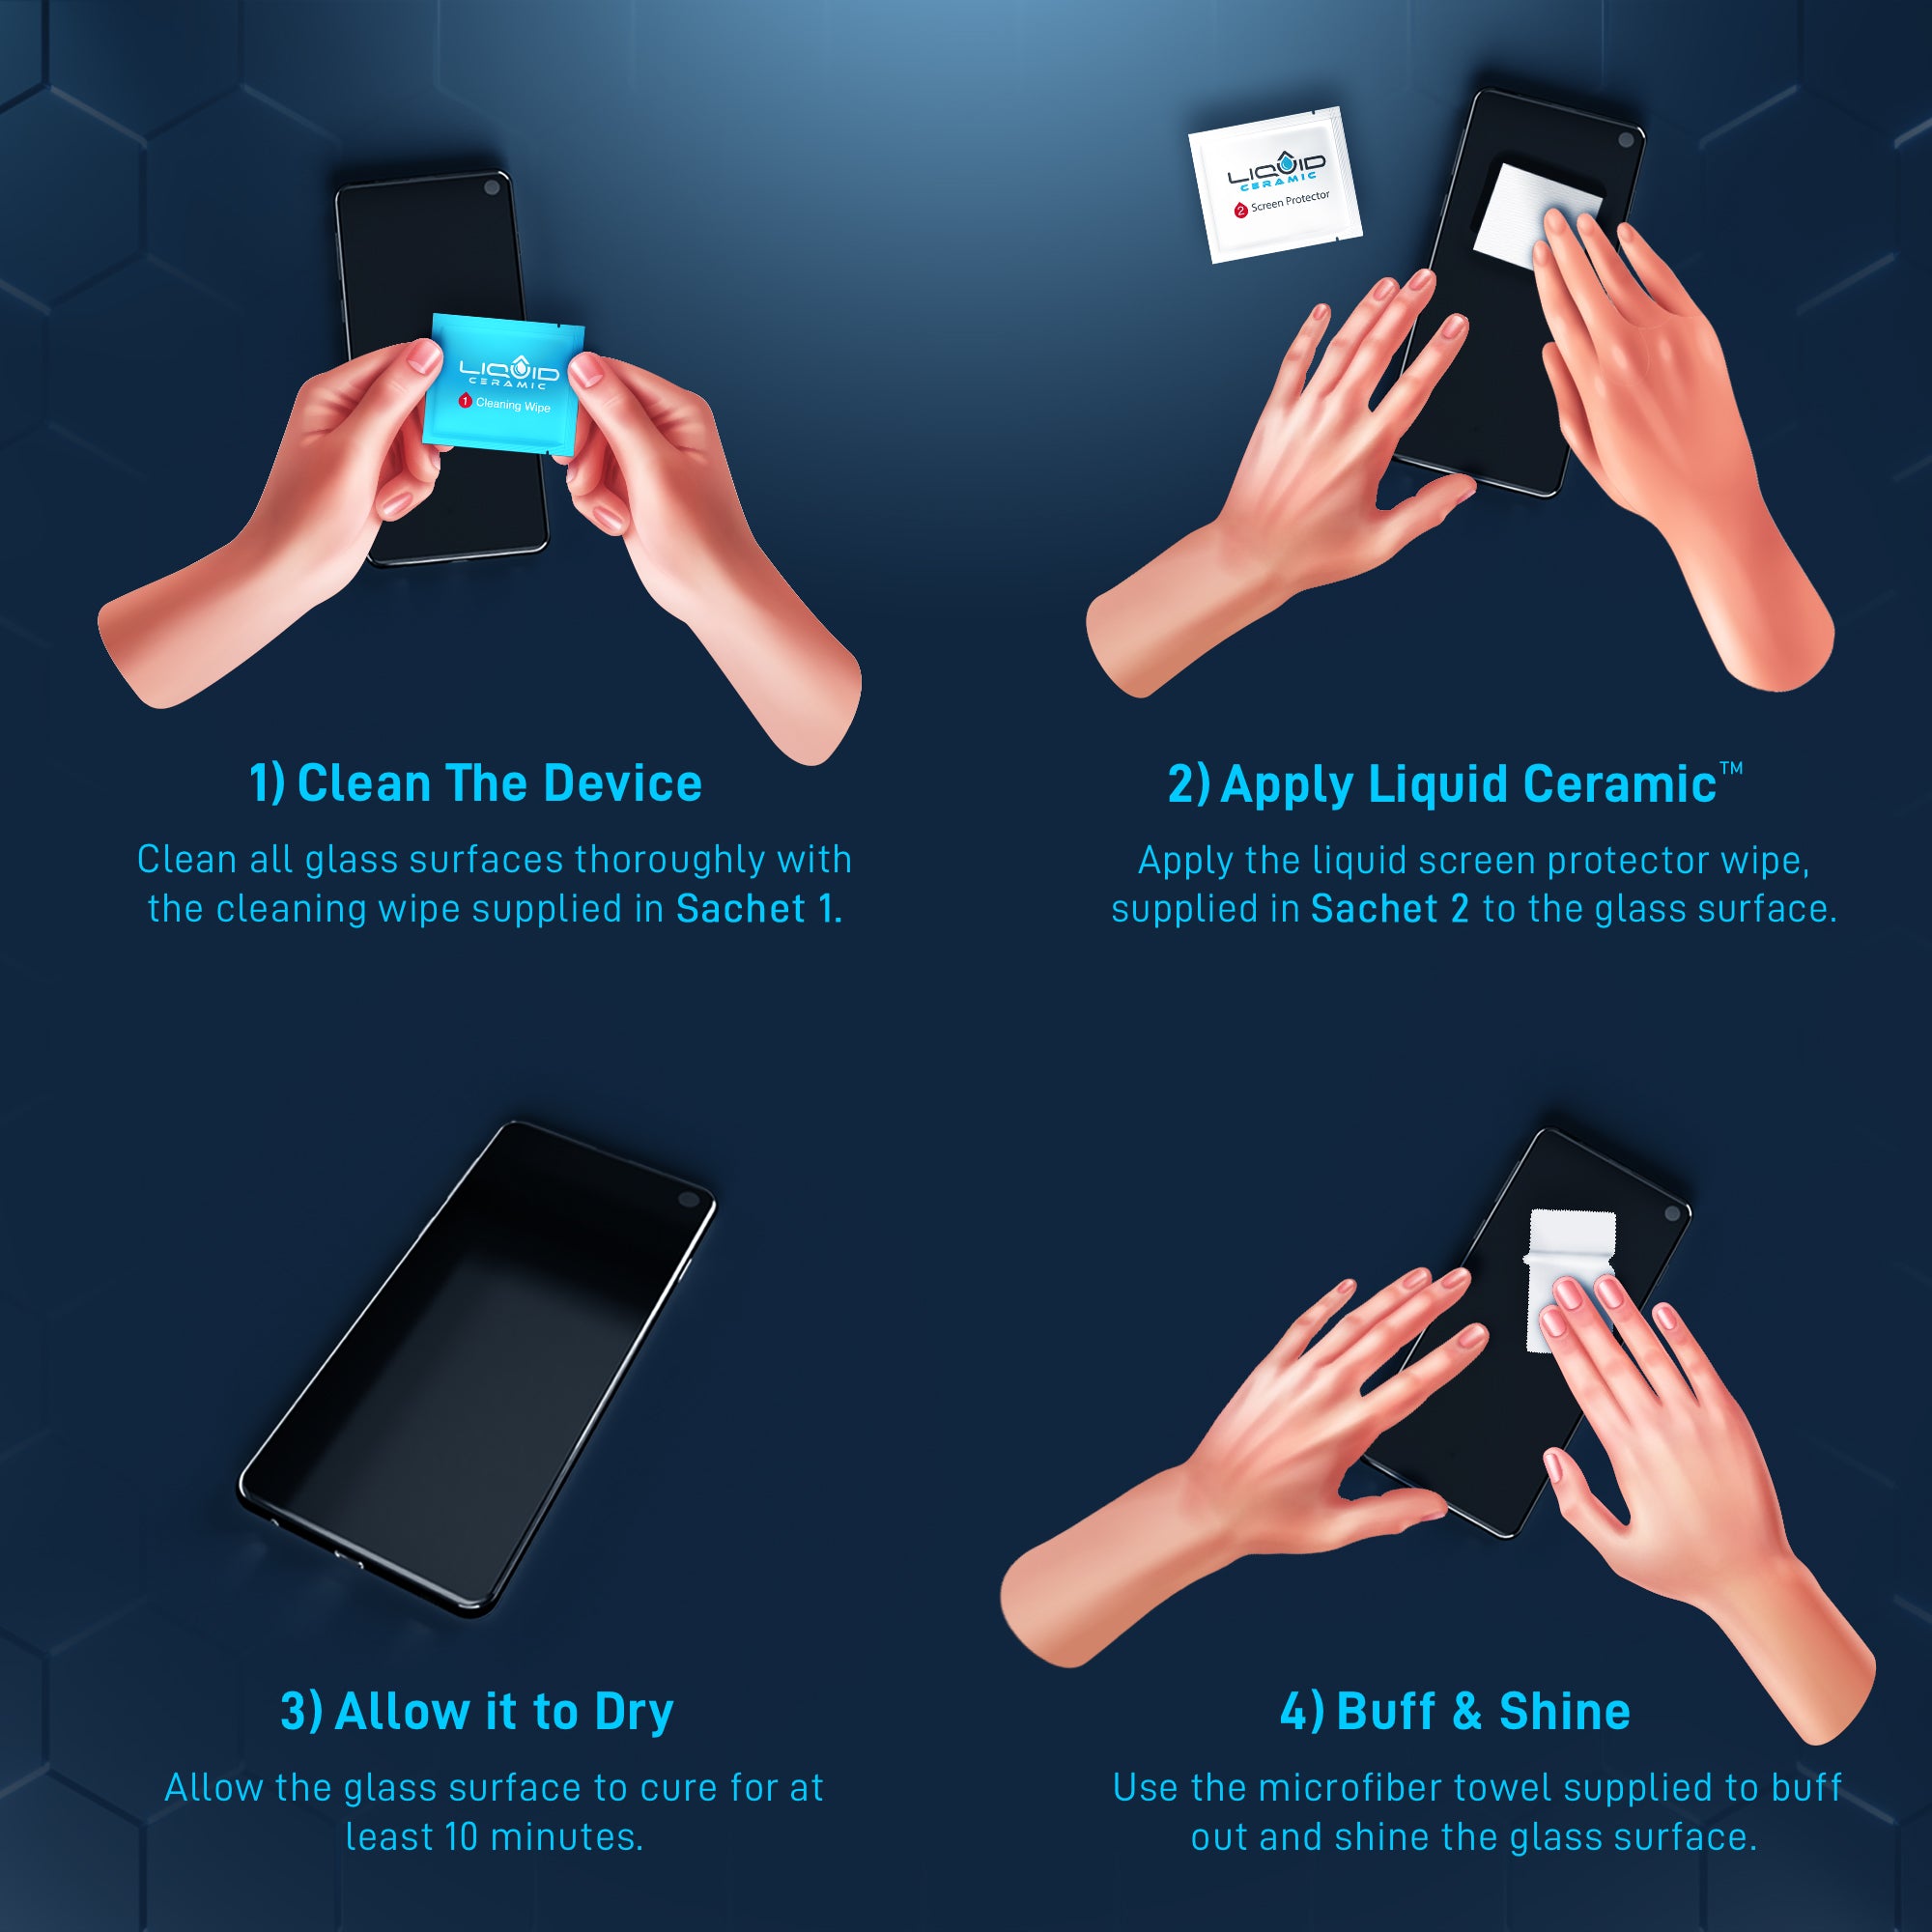 Liquid Ceramic Screen Protector with $200 Guarantee for All Phones Tablets and Smart Watches